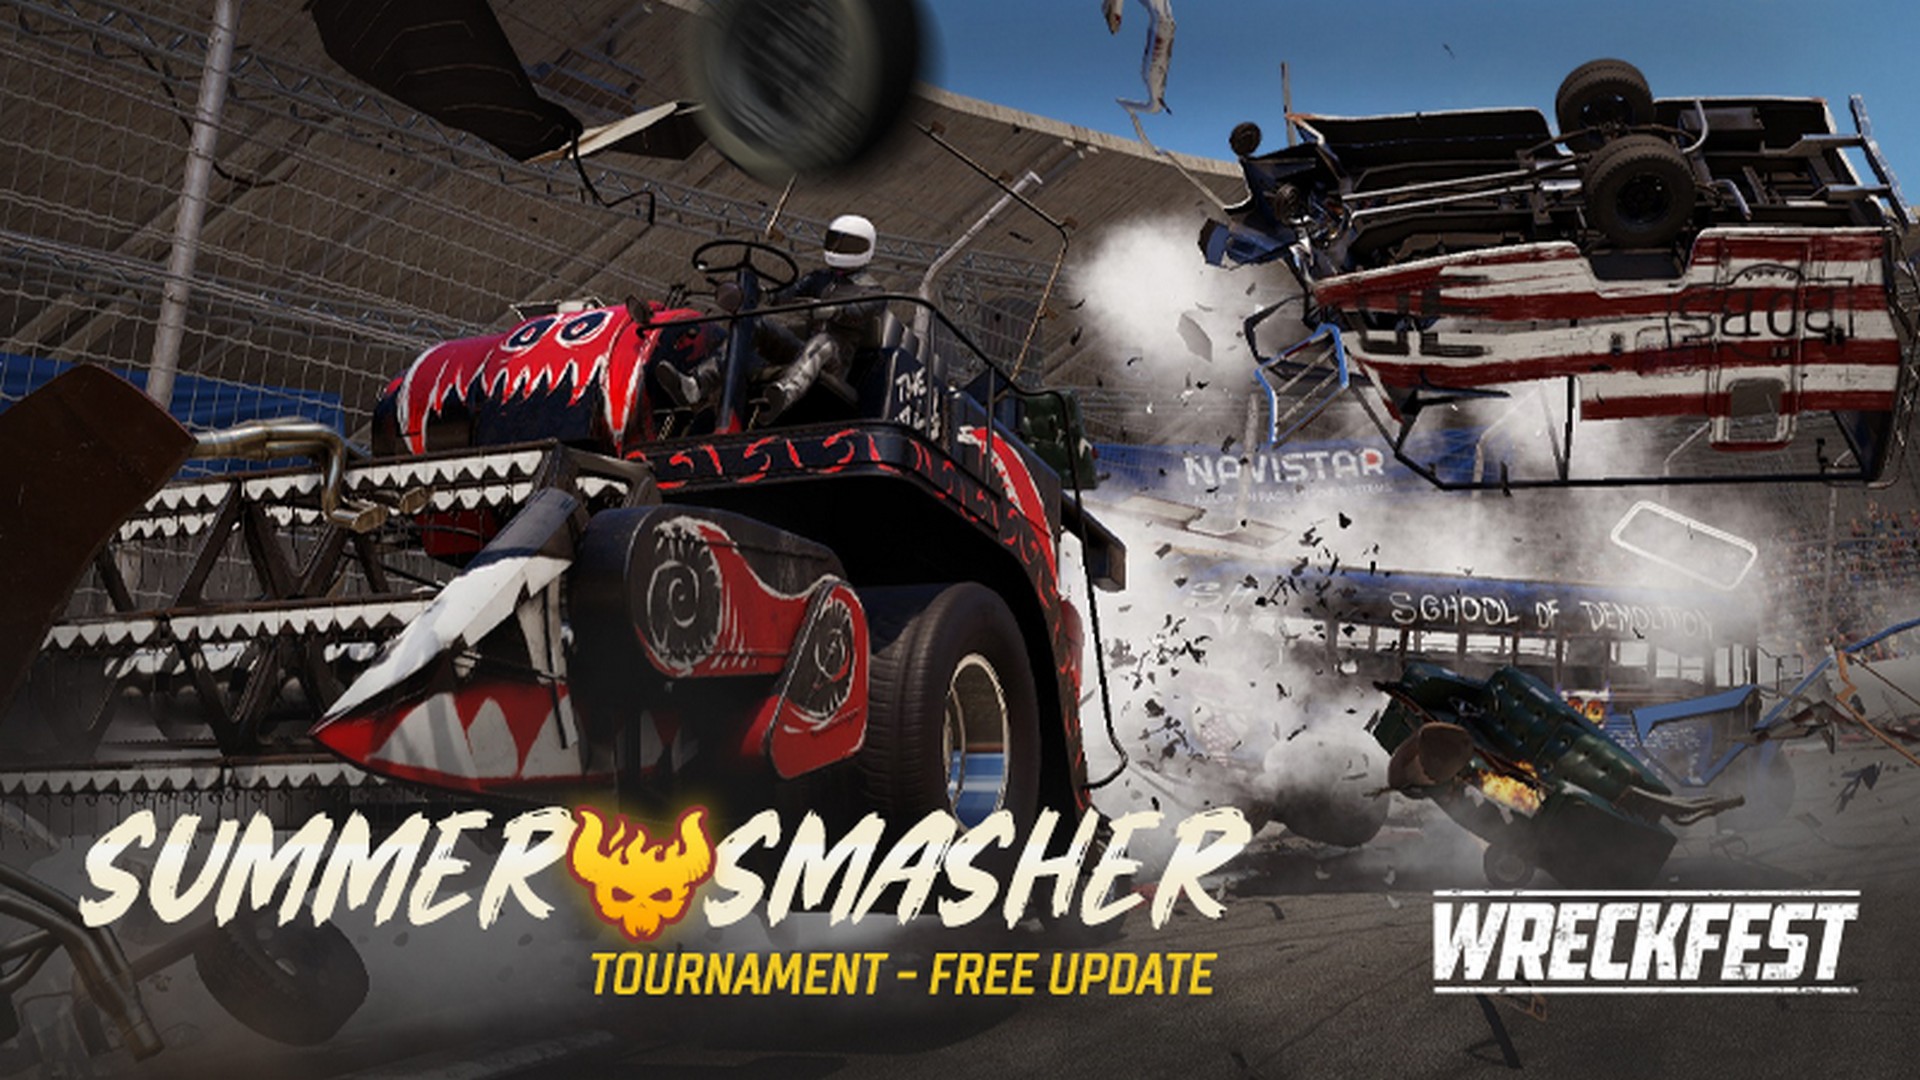 Wreckfest Launches The SUMMER SMASHER Tournament – Can You Unlock The Hellvester?